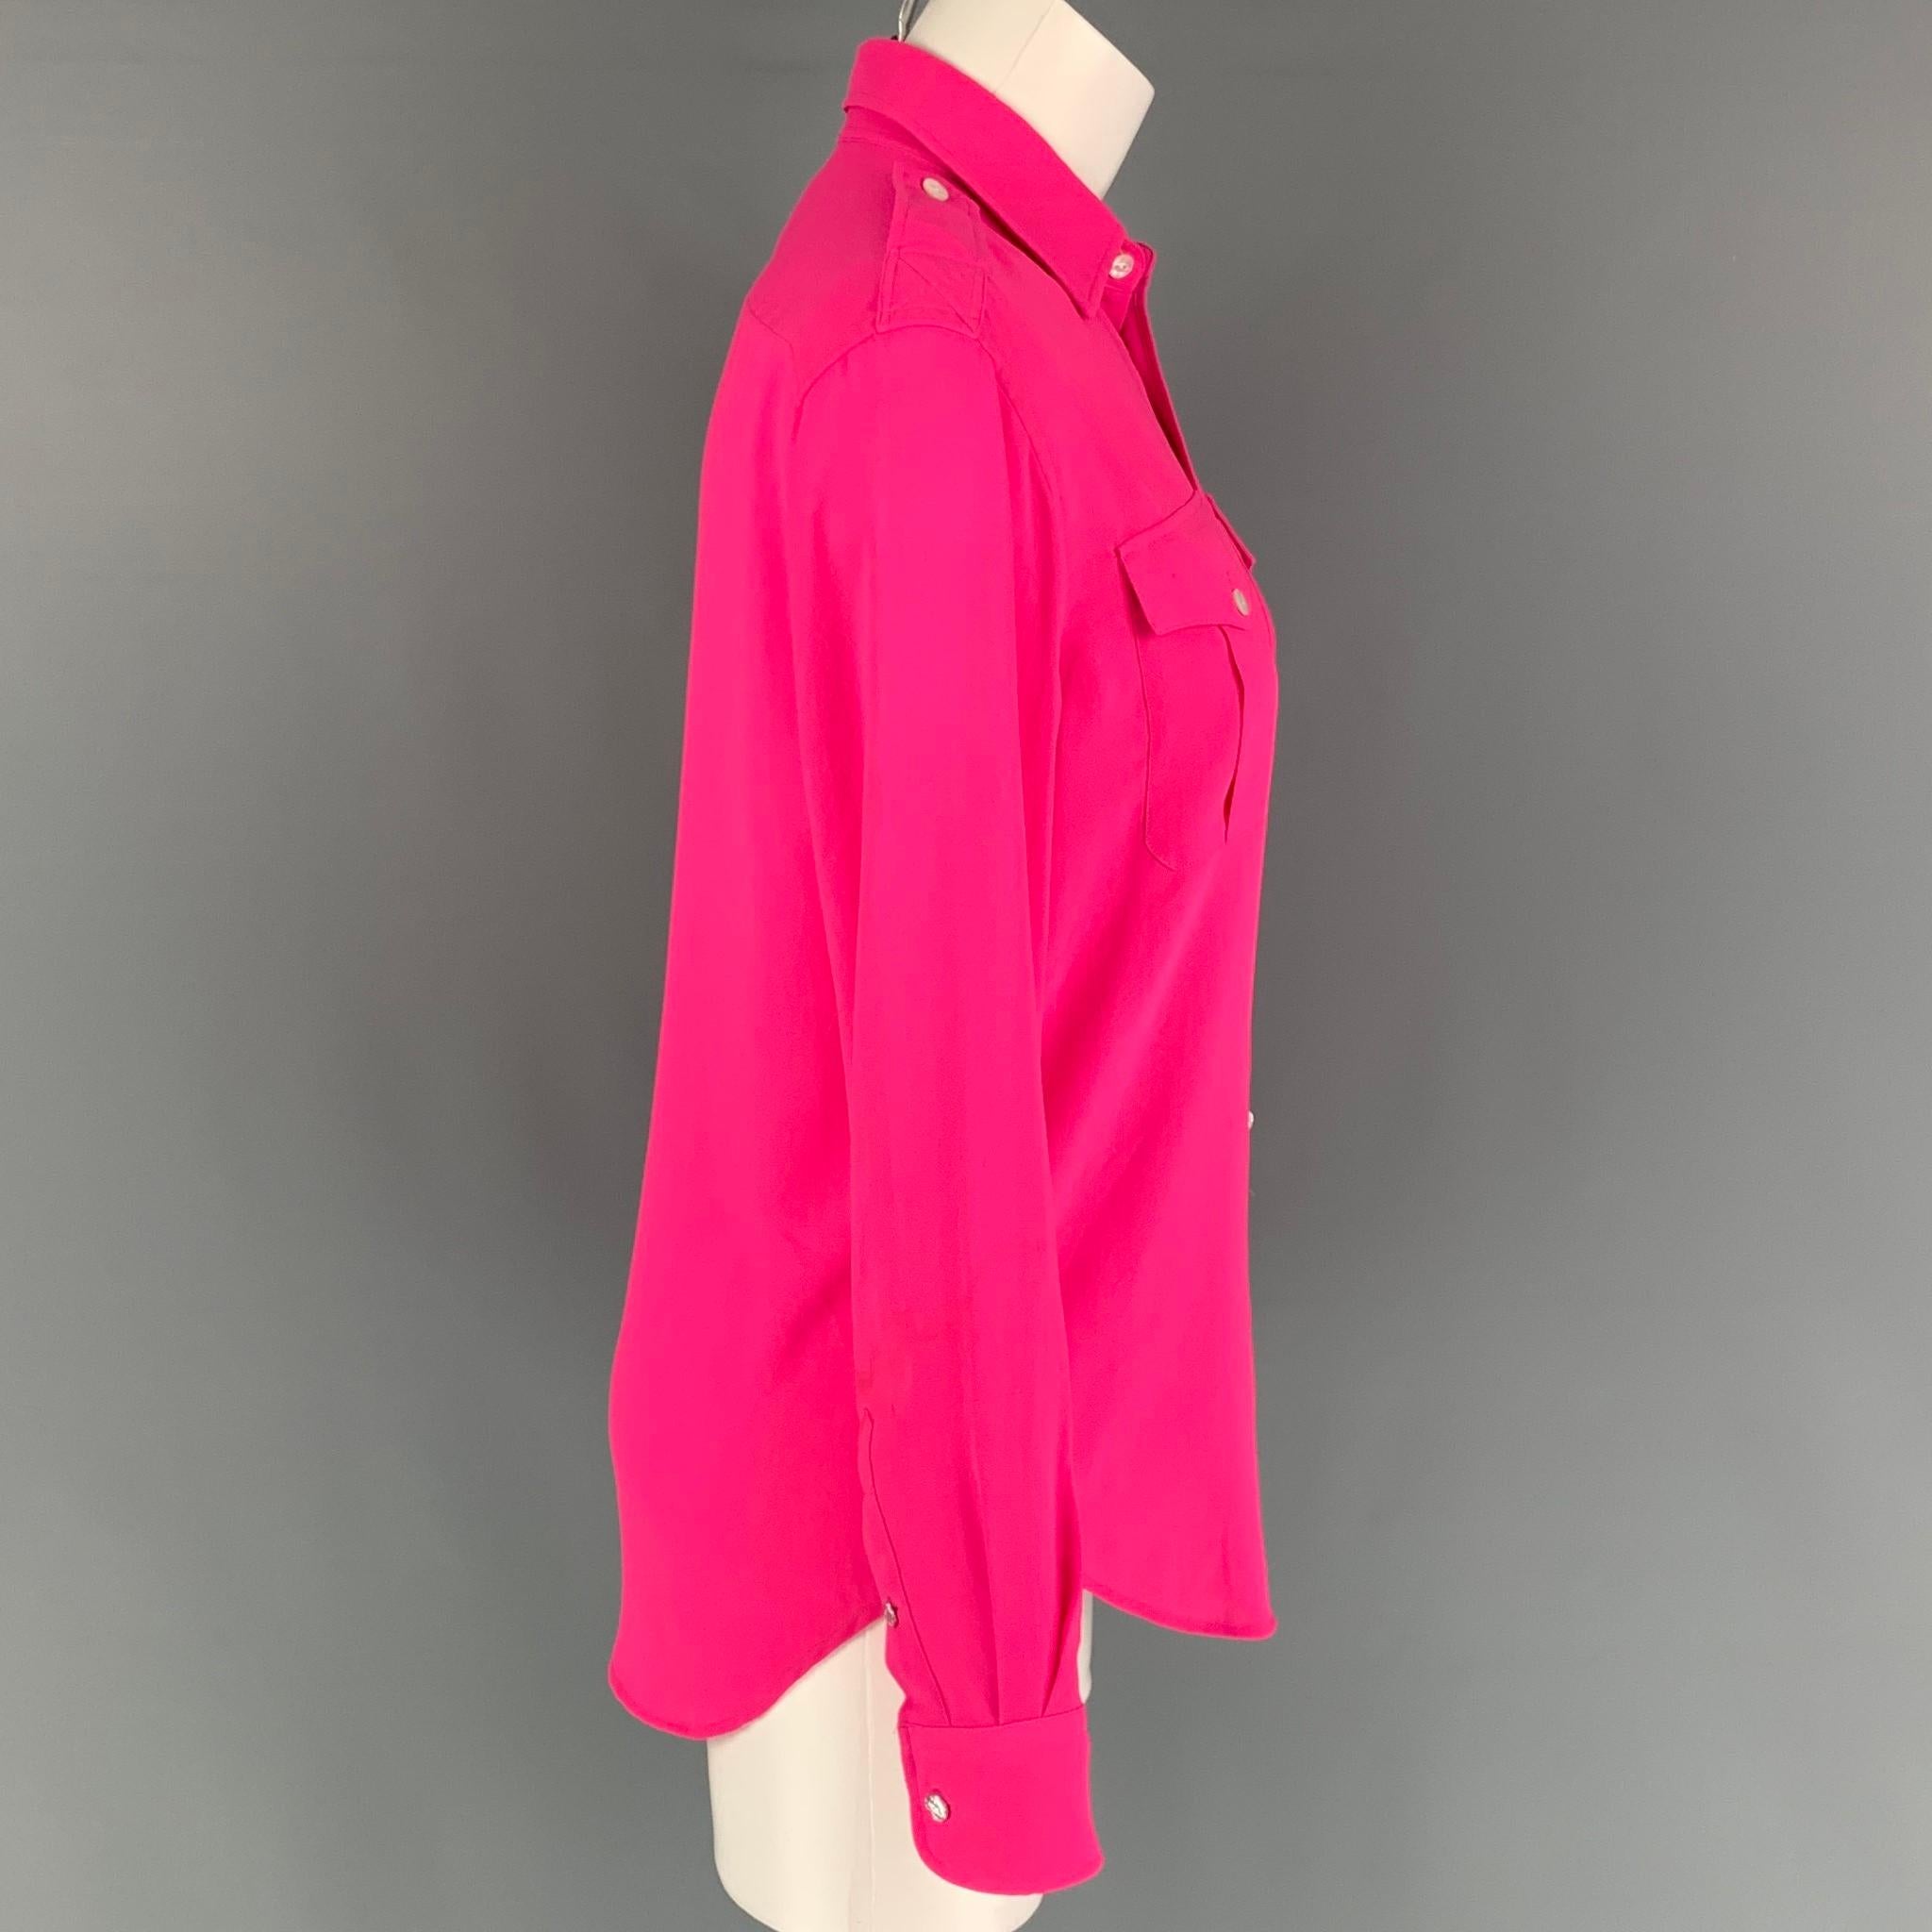 RALPH LAUREN 'Black Label' shirt comes in a pink polyester featuring a relaxed fit, epaulettes, patch pockets, spread collar, and a button up closure. 

Very Good Pre-Owned Condition.
Marked: 2

Measurements:

Shoulder: 16 in.
Bust: 37 in.
Sleeve: